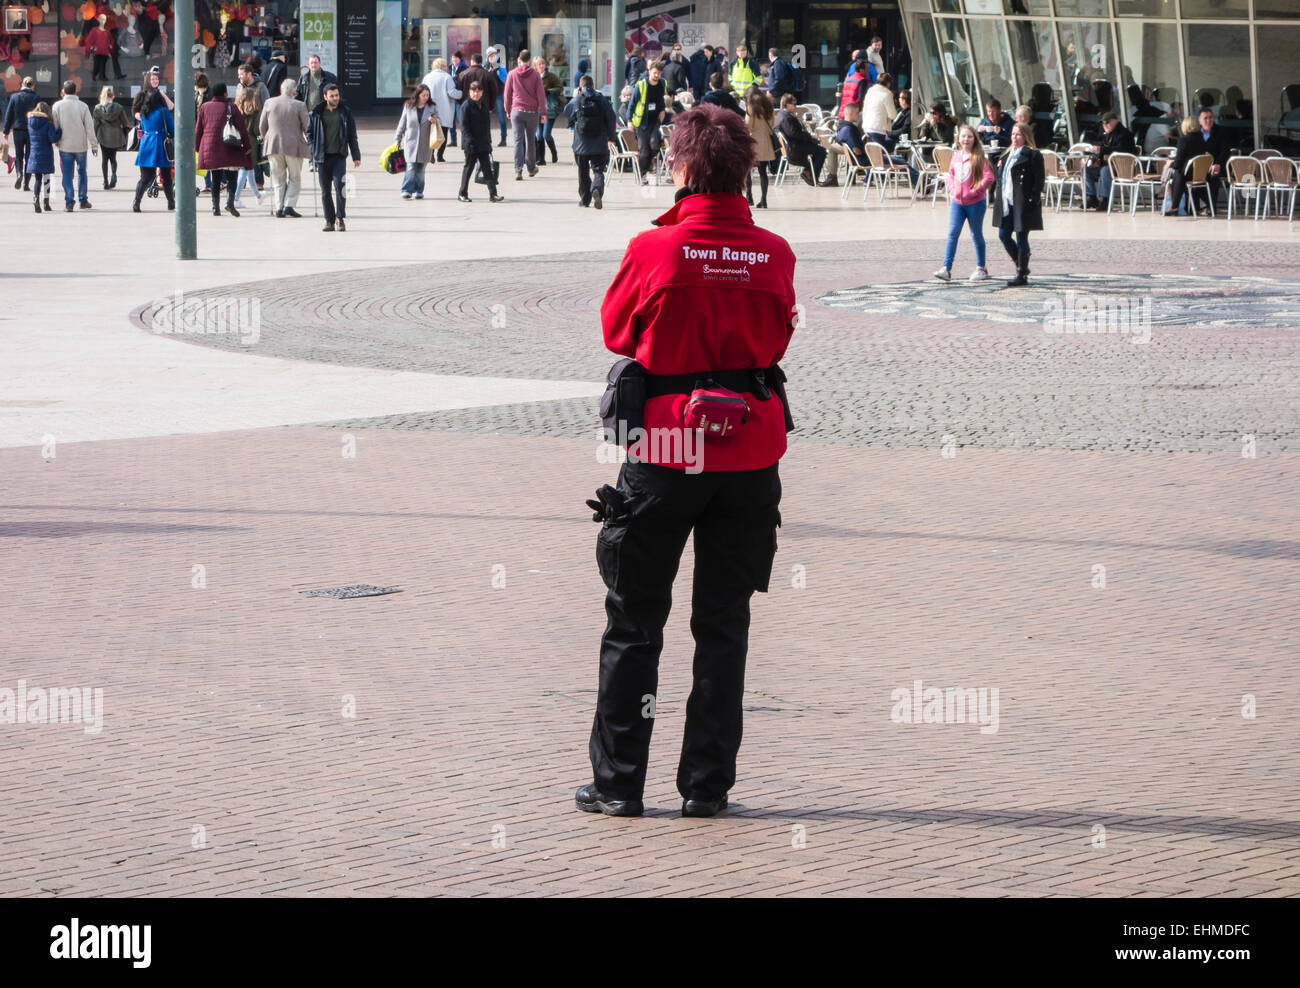 Town Centre Ranger on duty in The Square, Bournemouth, Dorset, England, UK Stock Photo